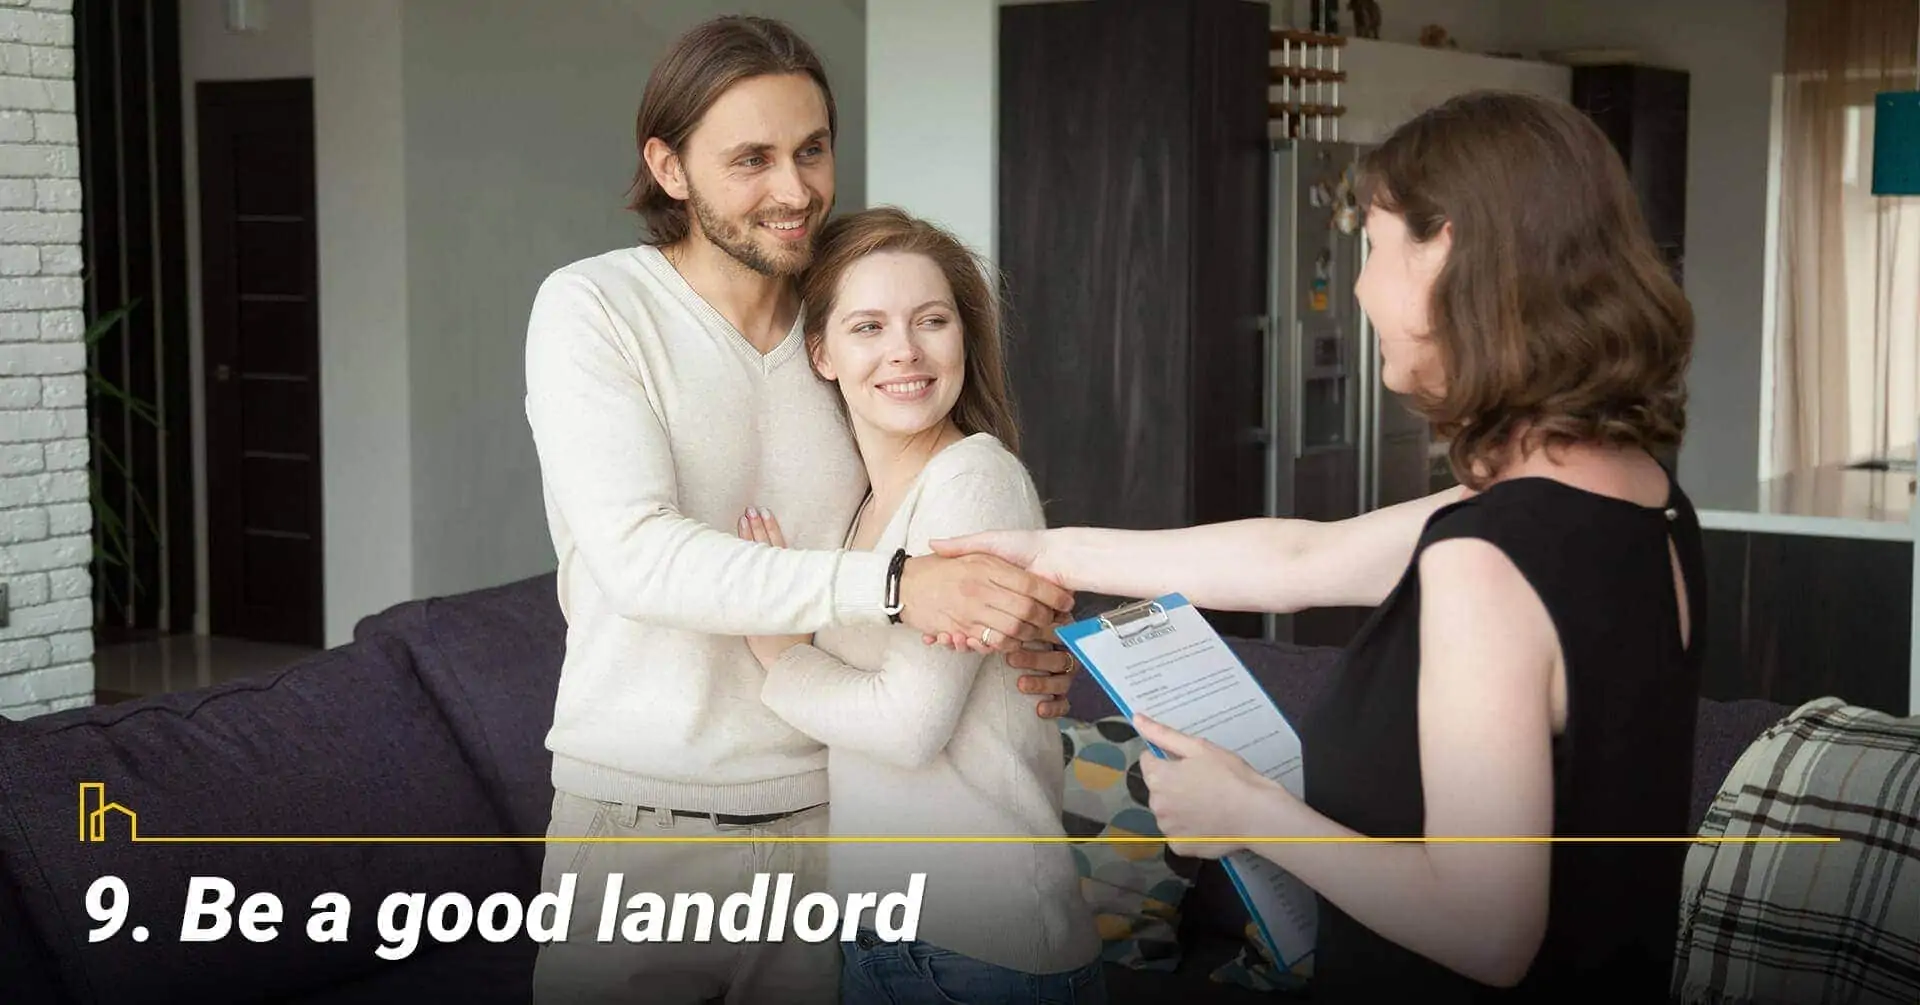 Be a good landlord, treat your tenants well